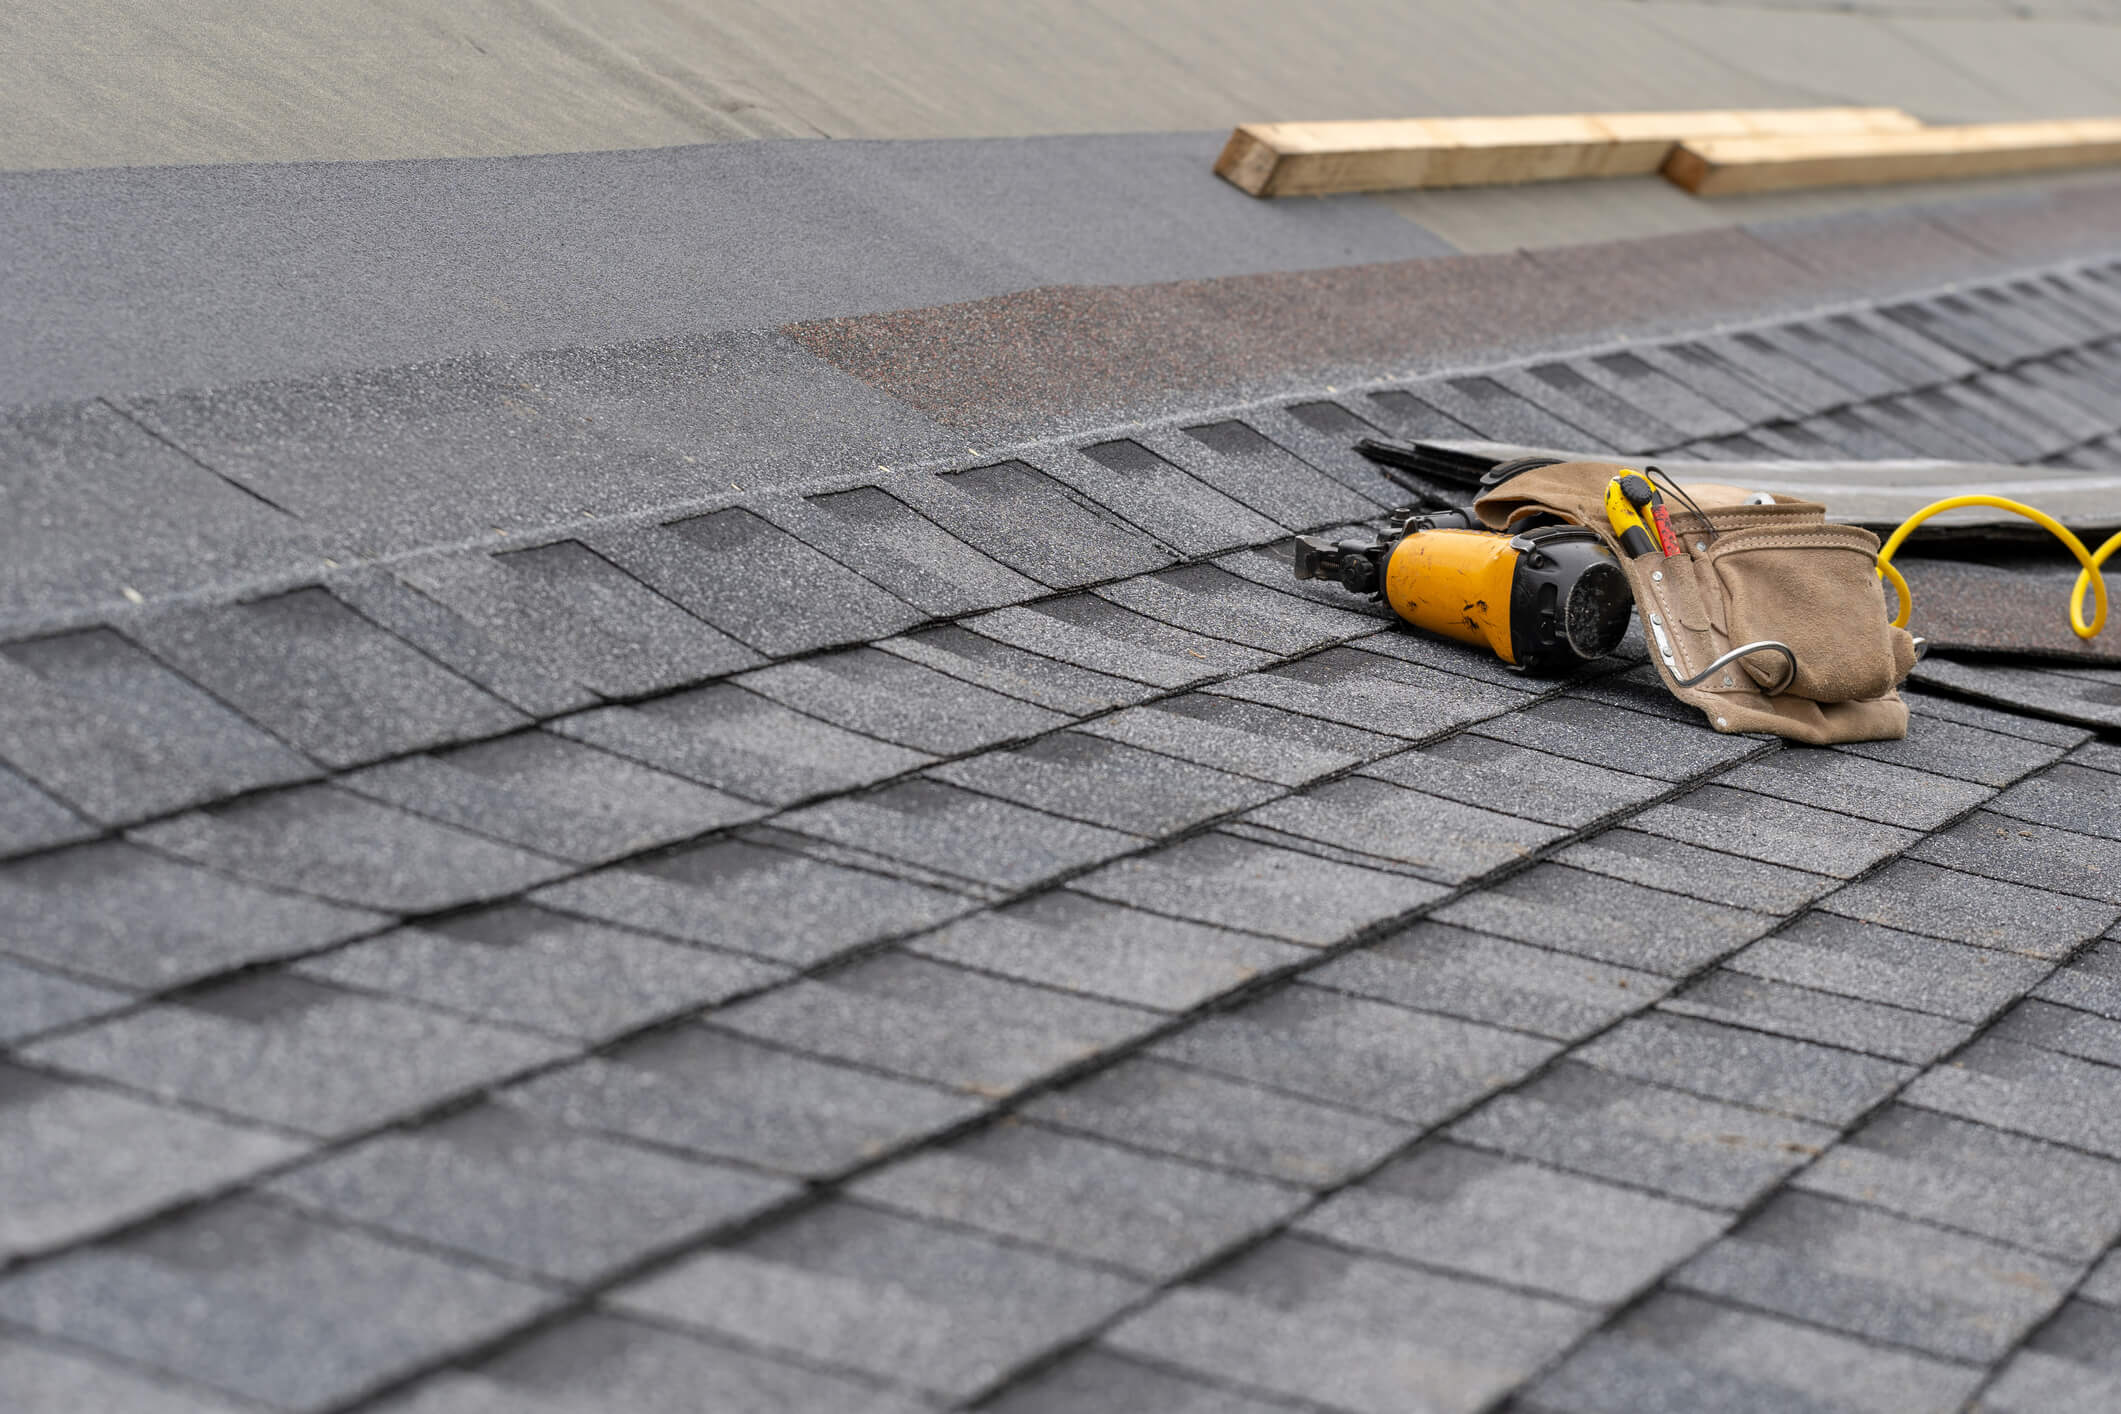 When Is The Time To Hire A Roofing Contractor?